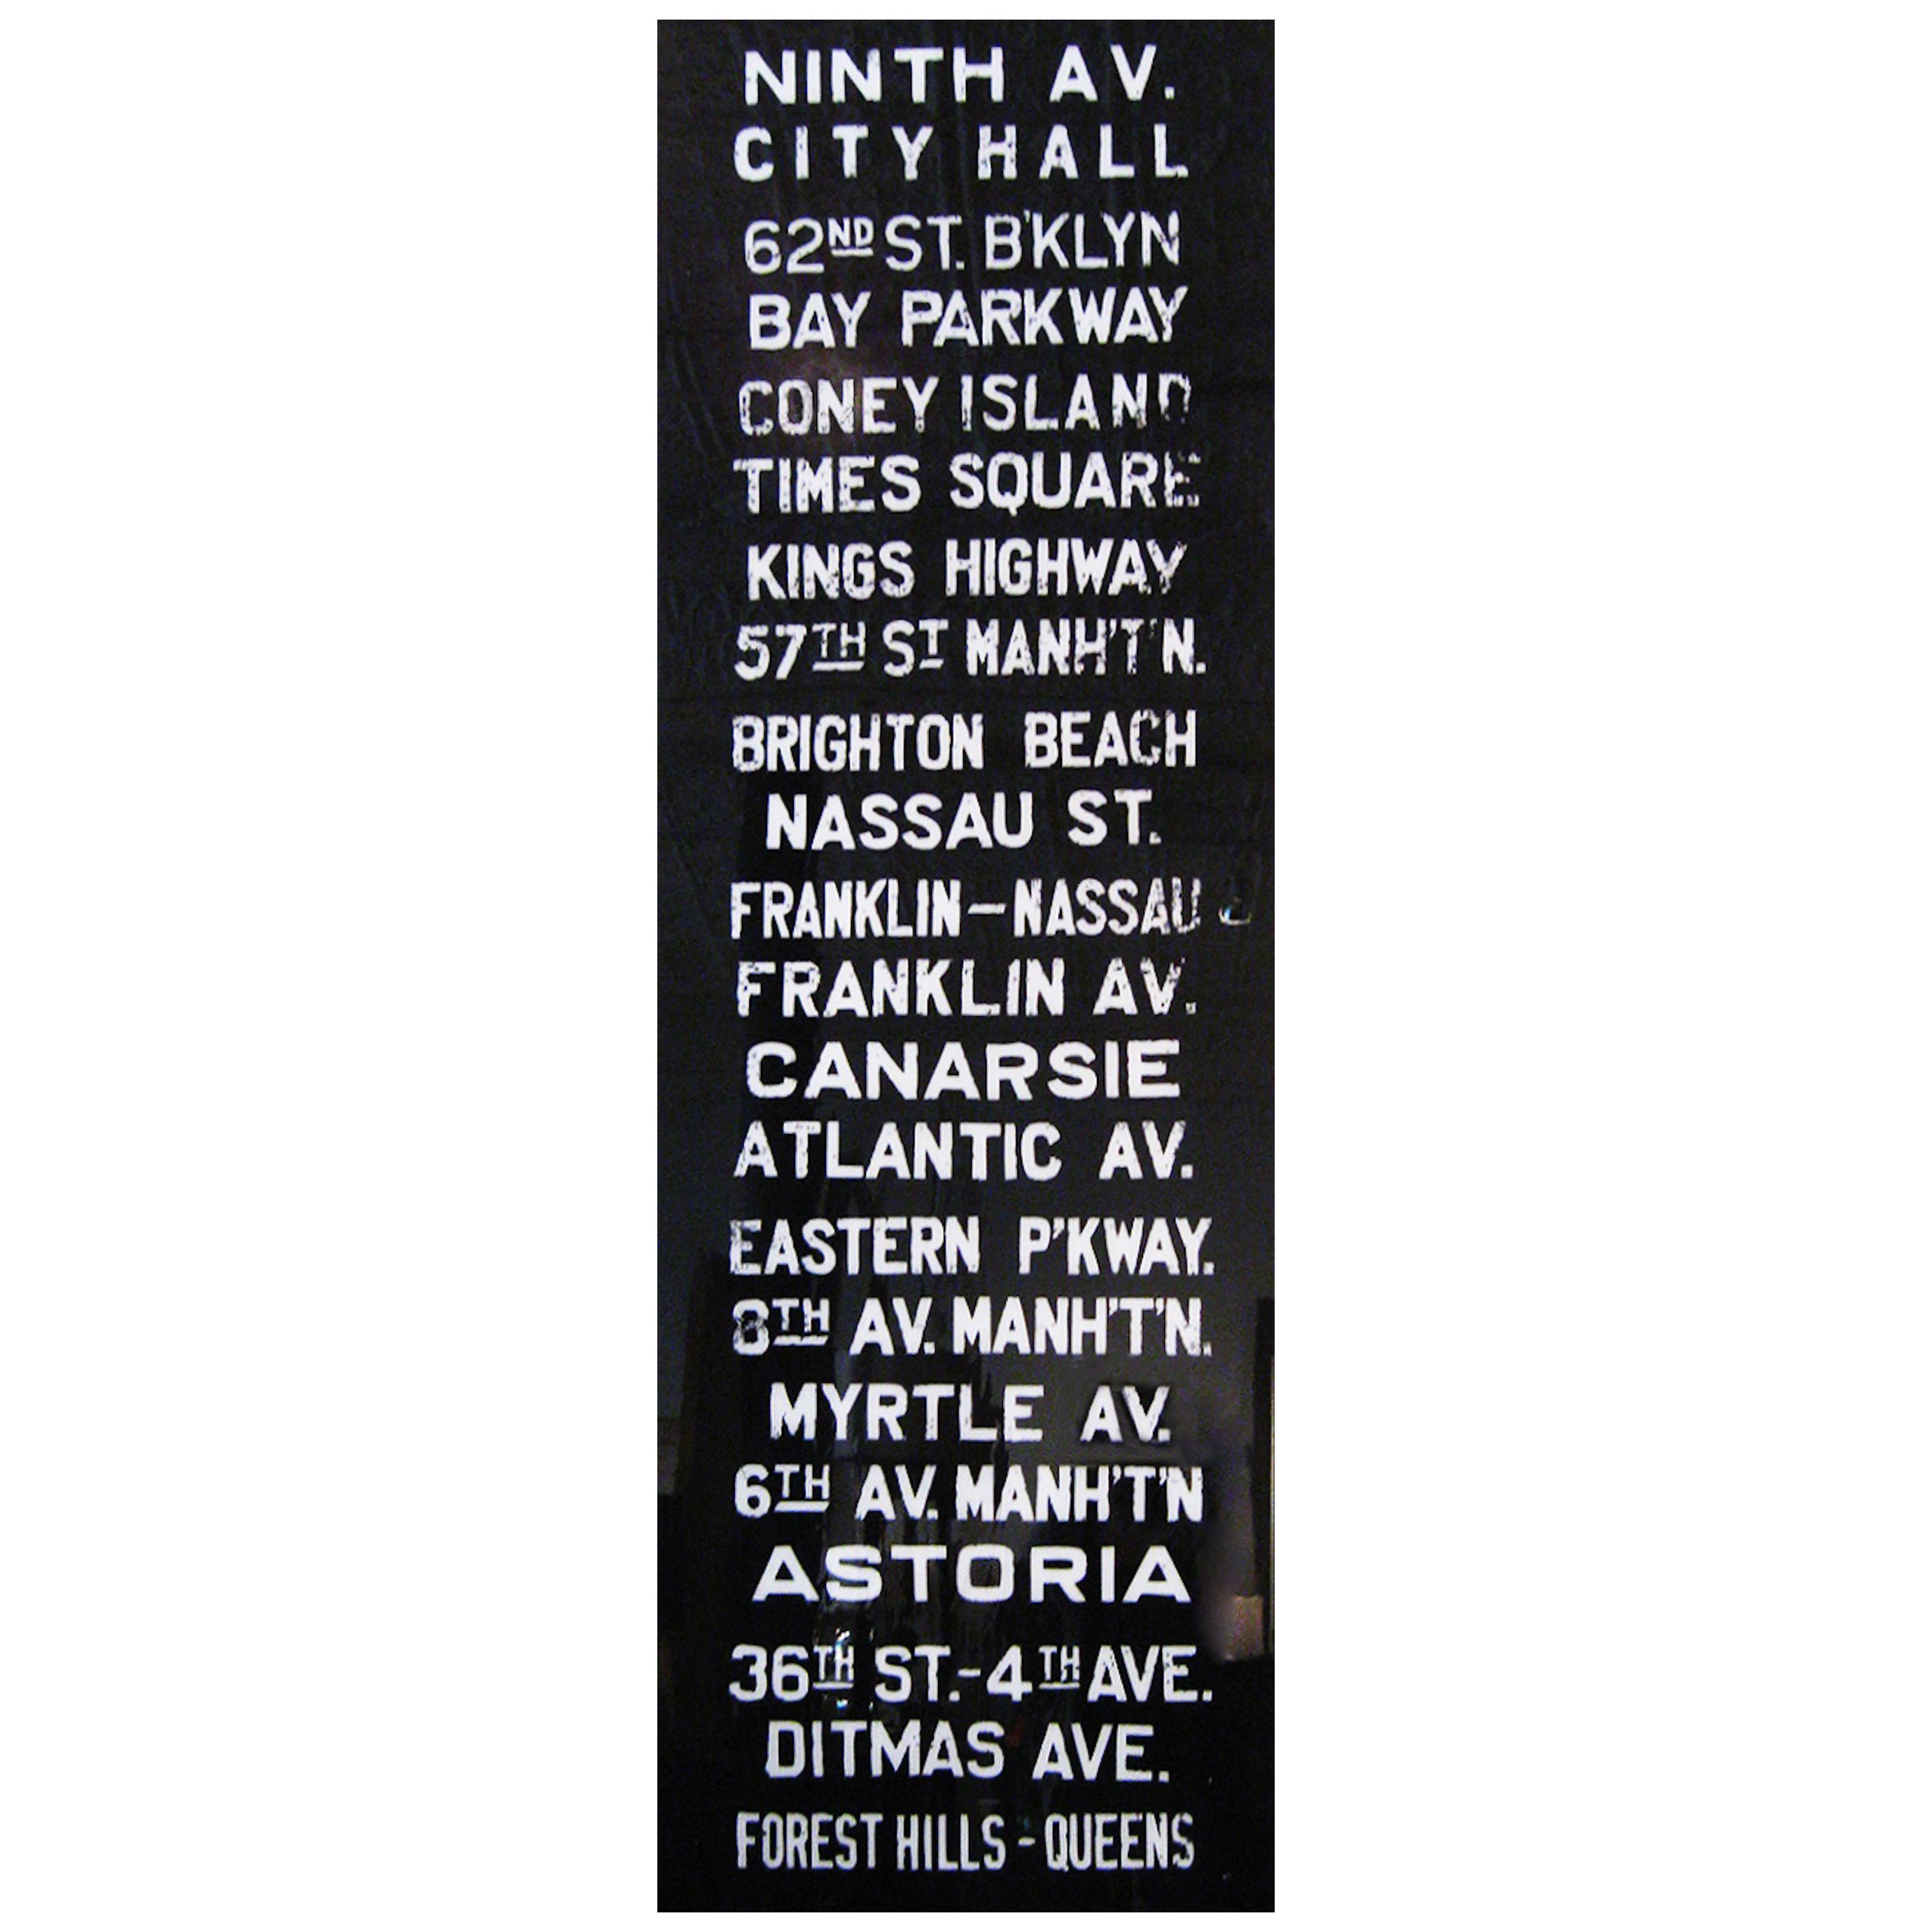 New York Subway Sign, Ninth Ave, mix media and resin, custom For Sale